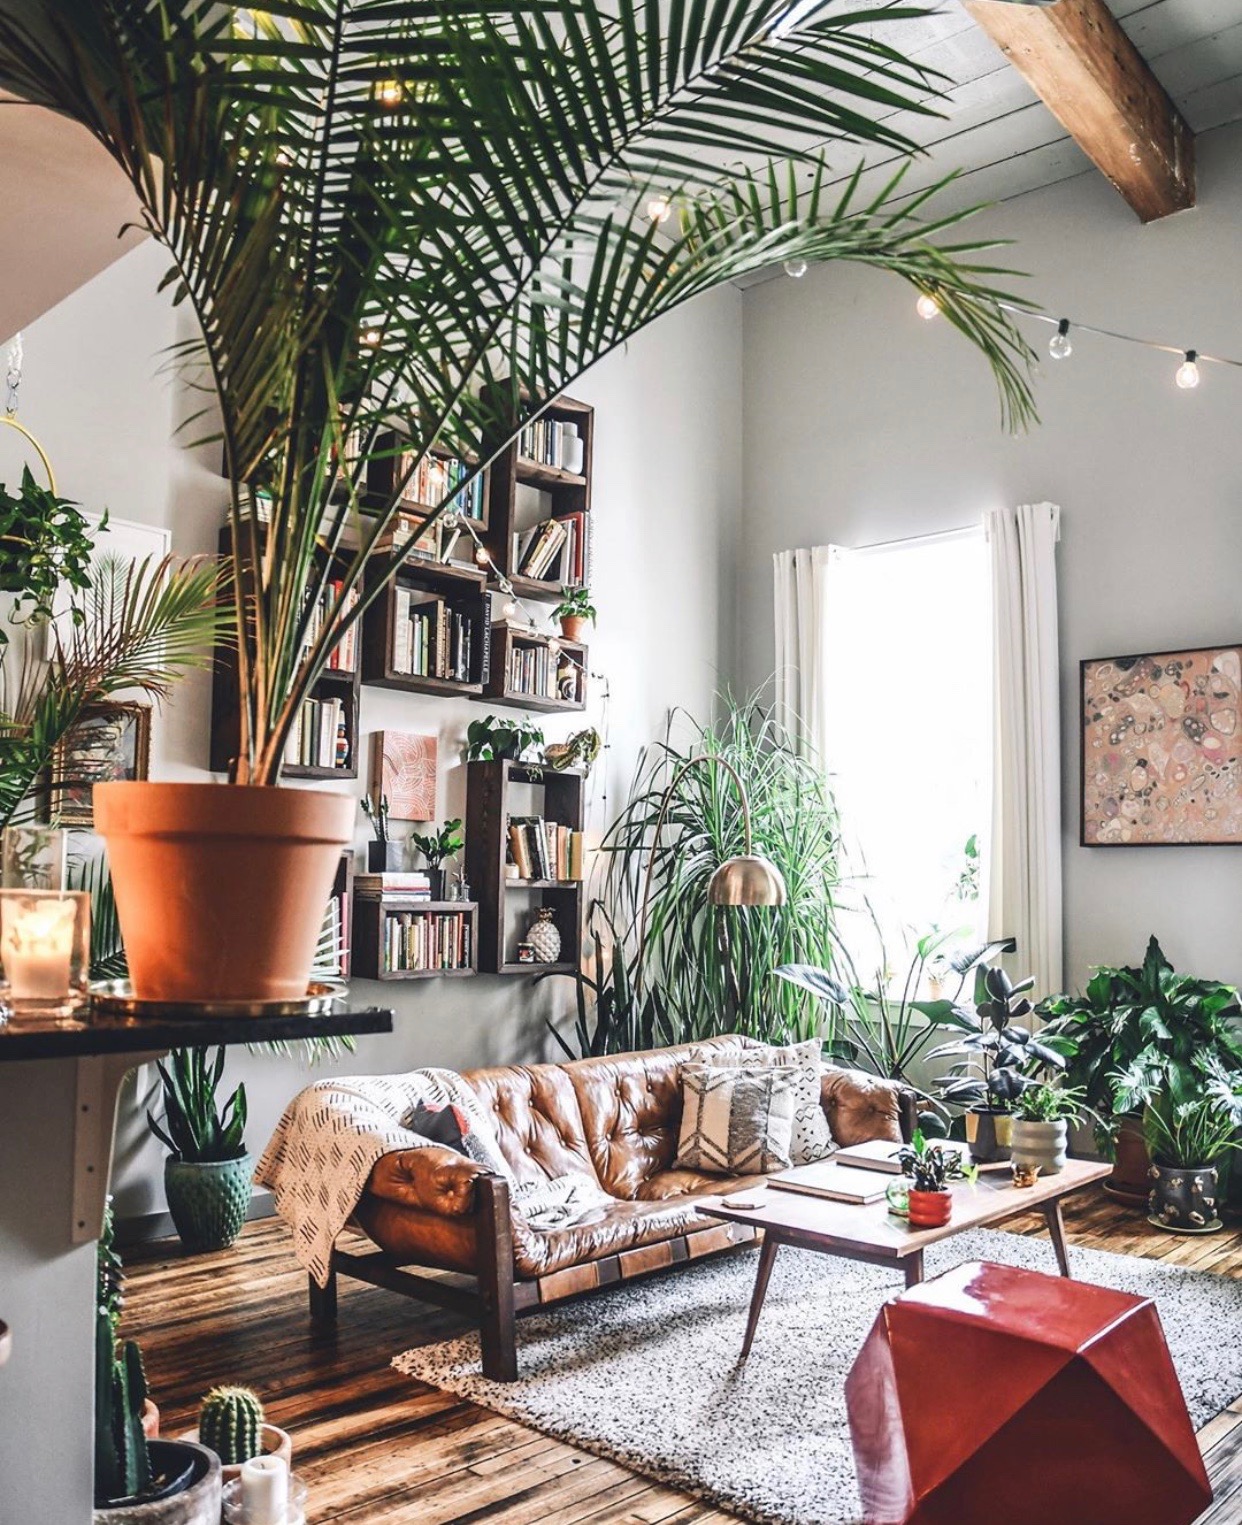 Indoor plants in Hilton Carter's Studio /// Gorgeous Indoor Plants That Will Liven Up Your Home /// By Design Fixation #plants #houseplants #homedecor #greenliving